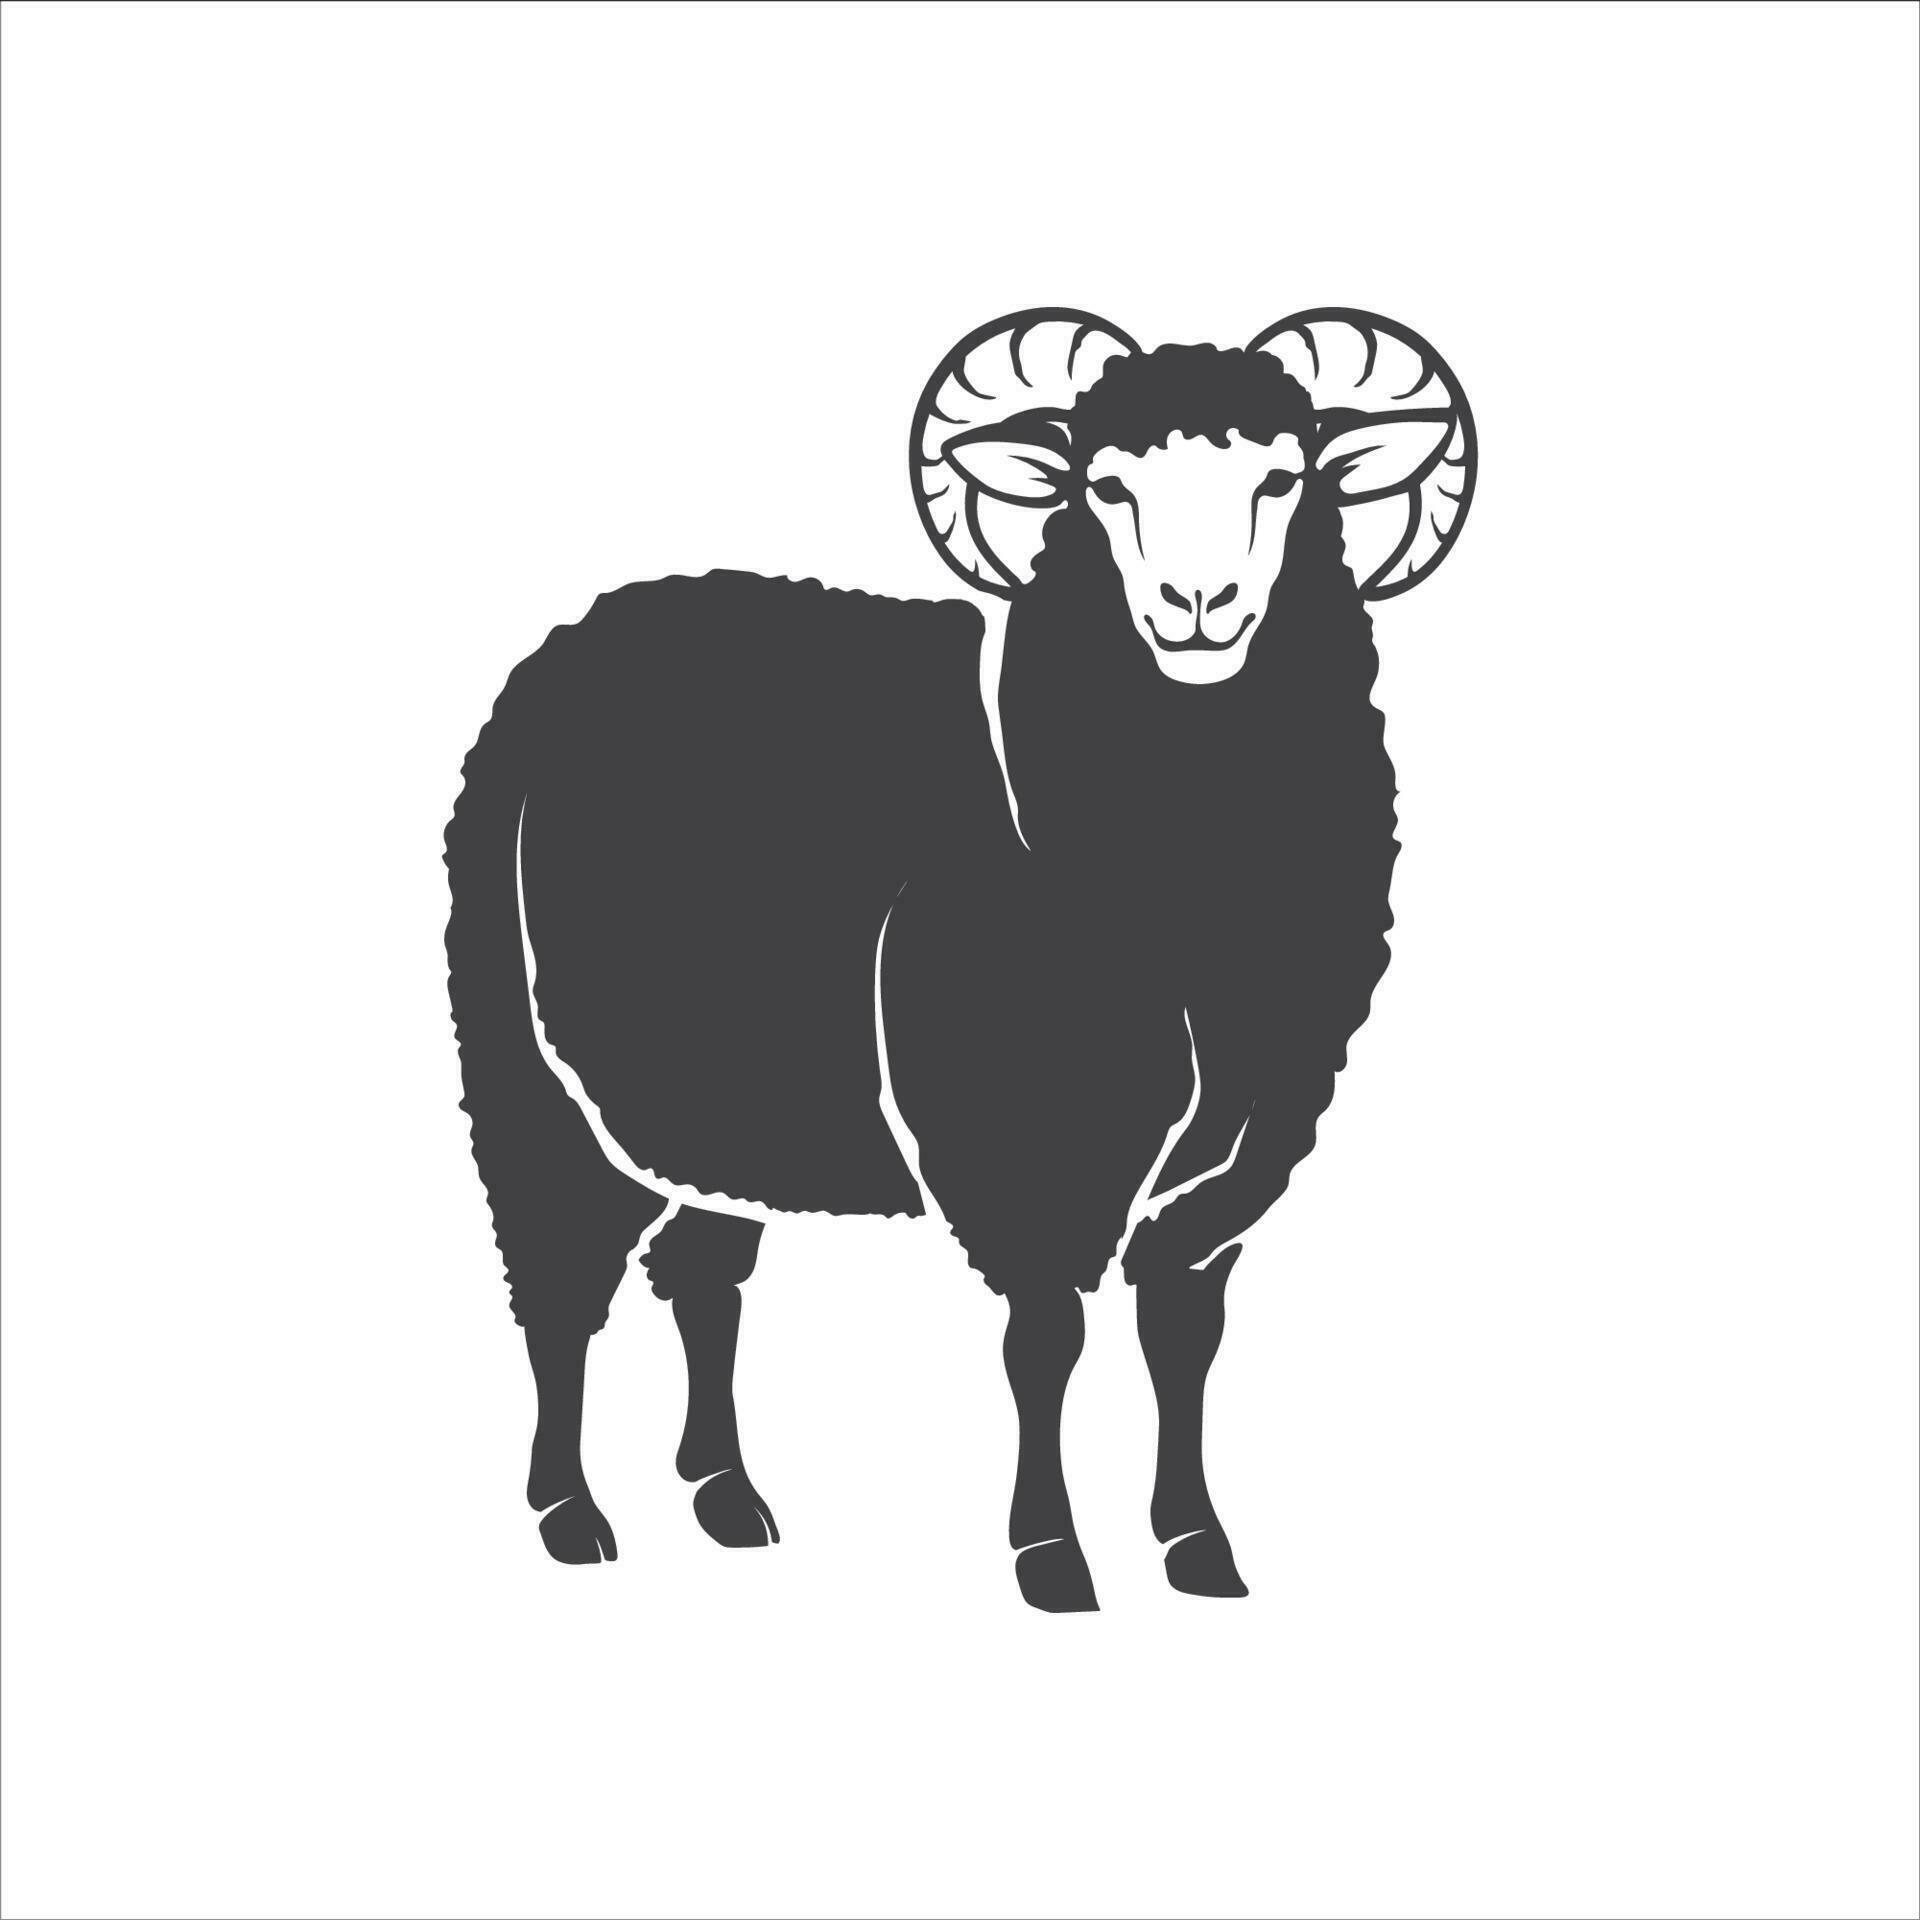 Sheep simple icon. Sheep with horned sign. Lamb silhouette icon. Trendy ...